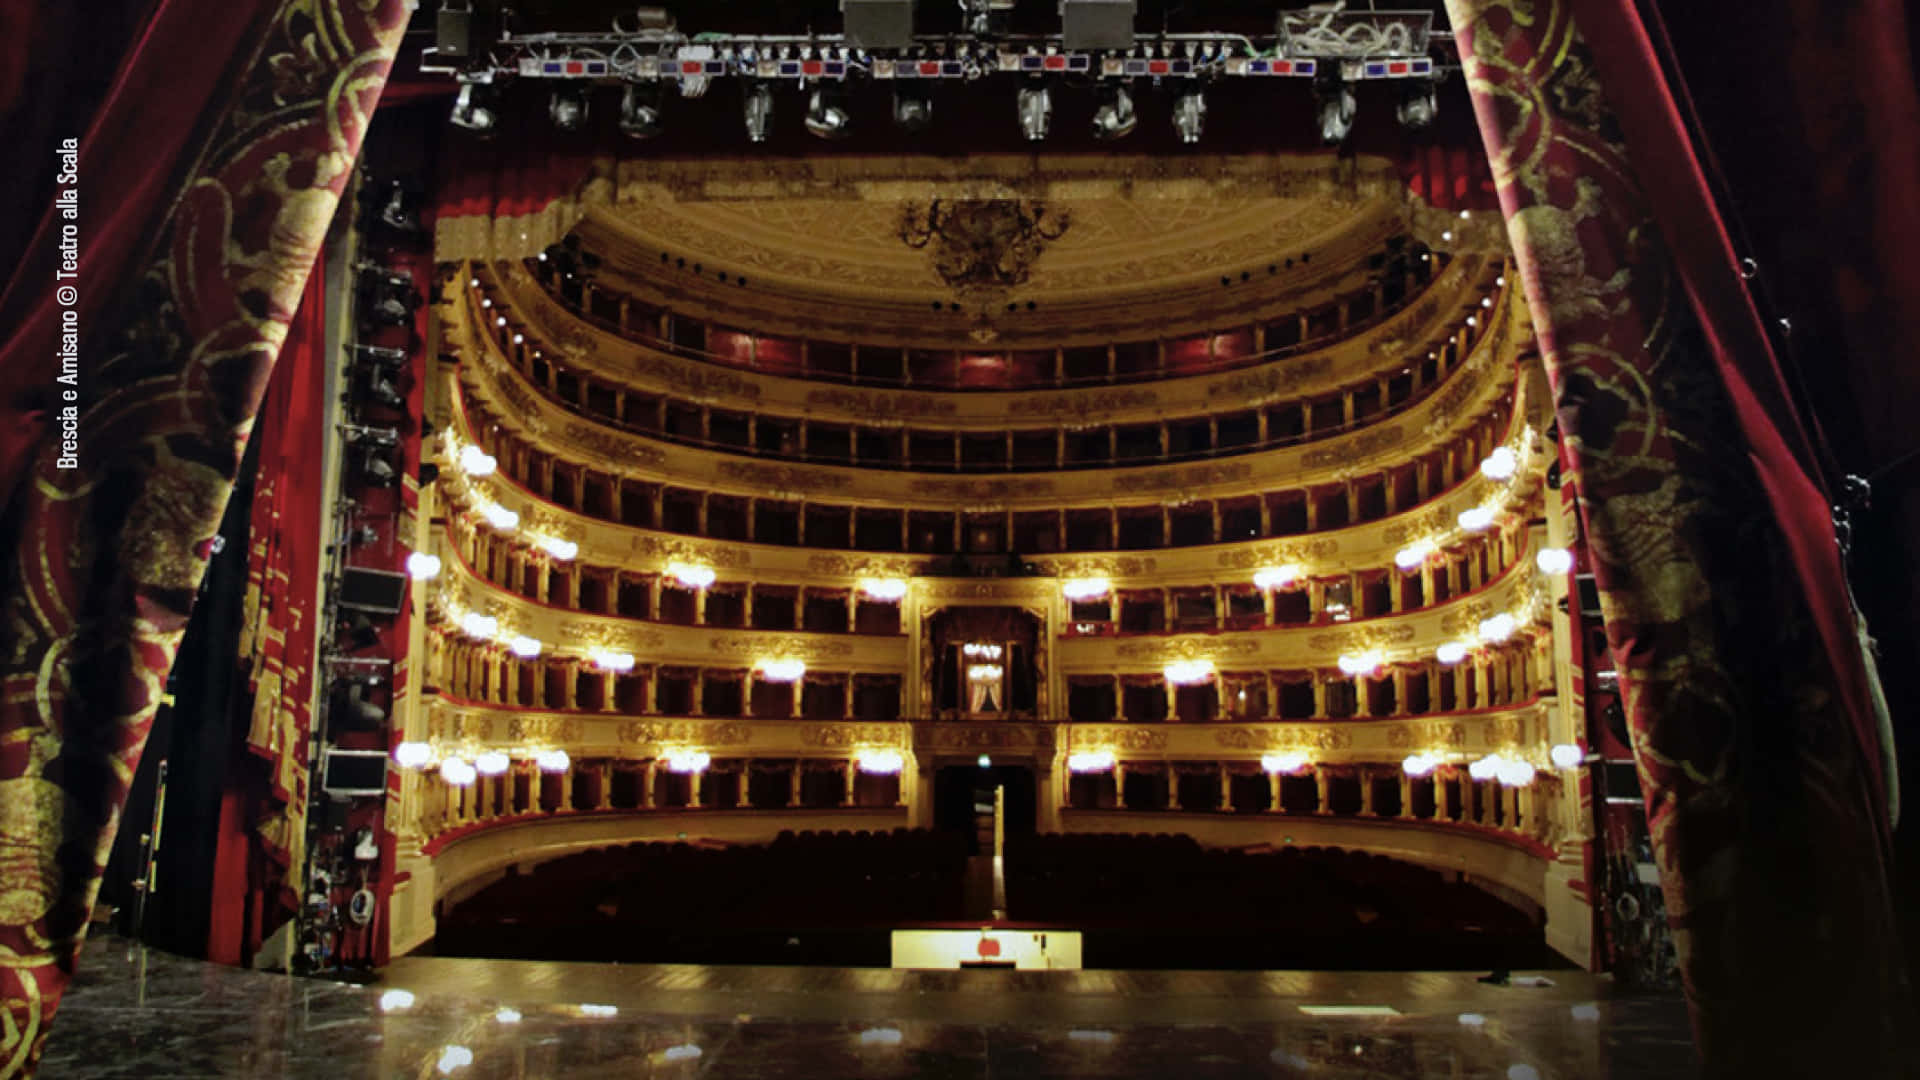 Curtains Parting Over Stage La Scala Opera House Wallpaper